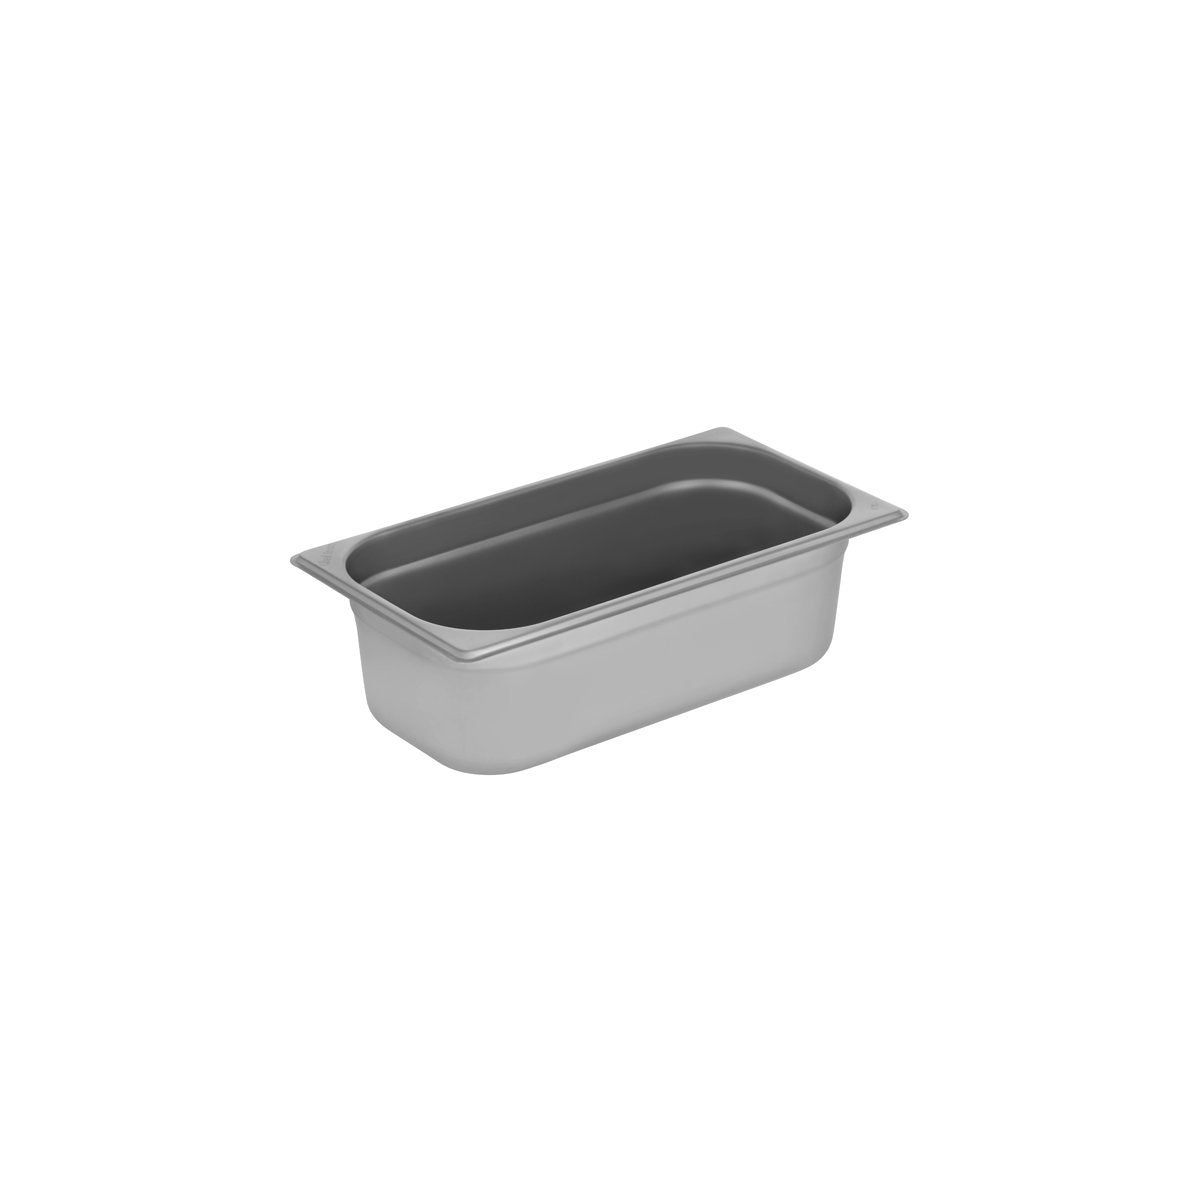 GN-13100 Chef Inox Gastronorm Pan 1/3 Size 100mm Tomkin Australia Hospitality Supplies